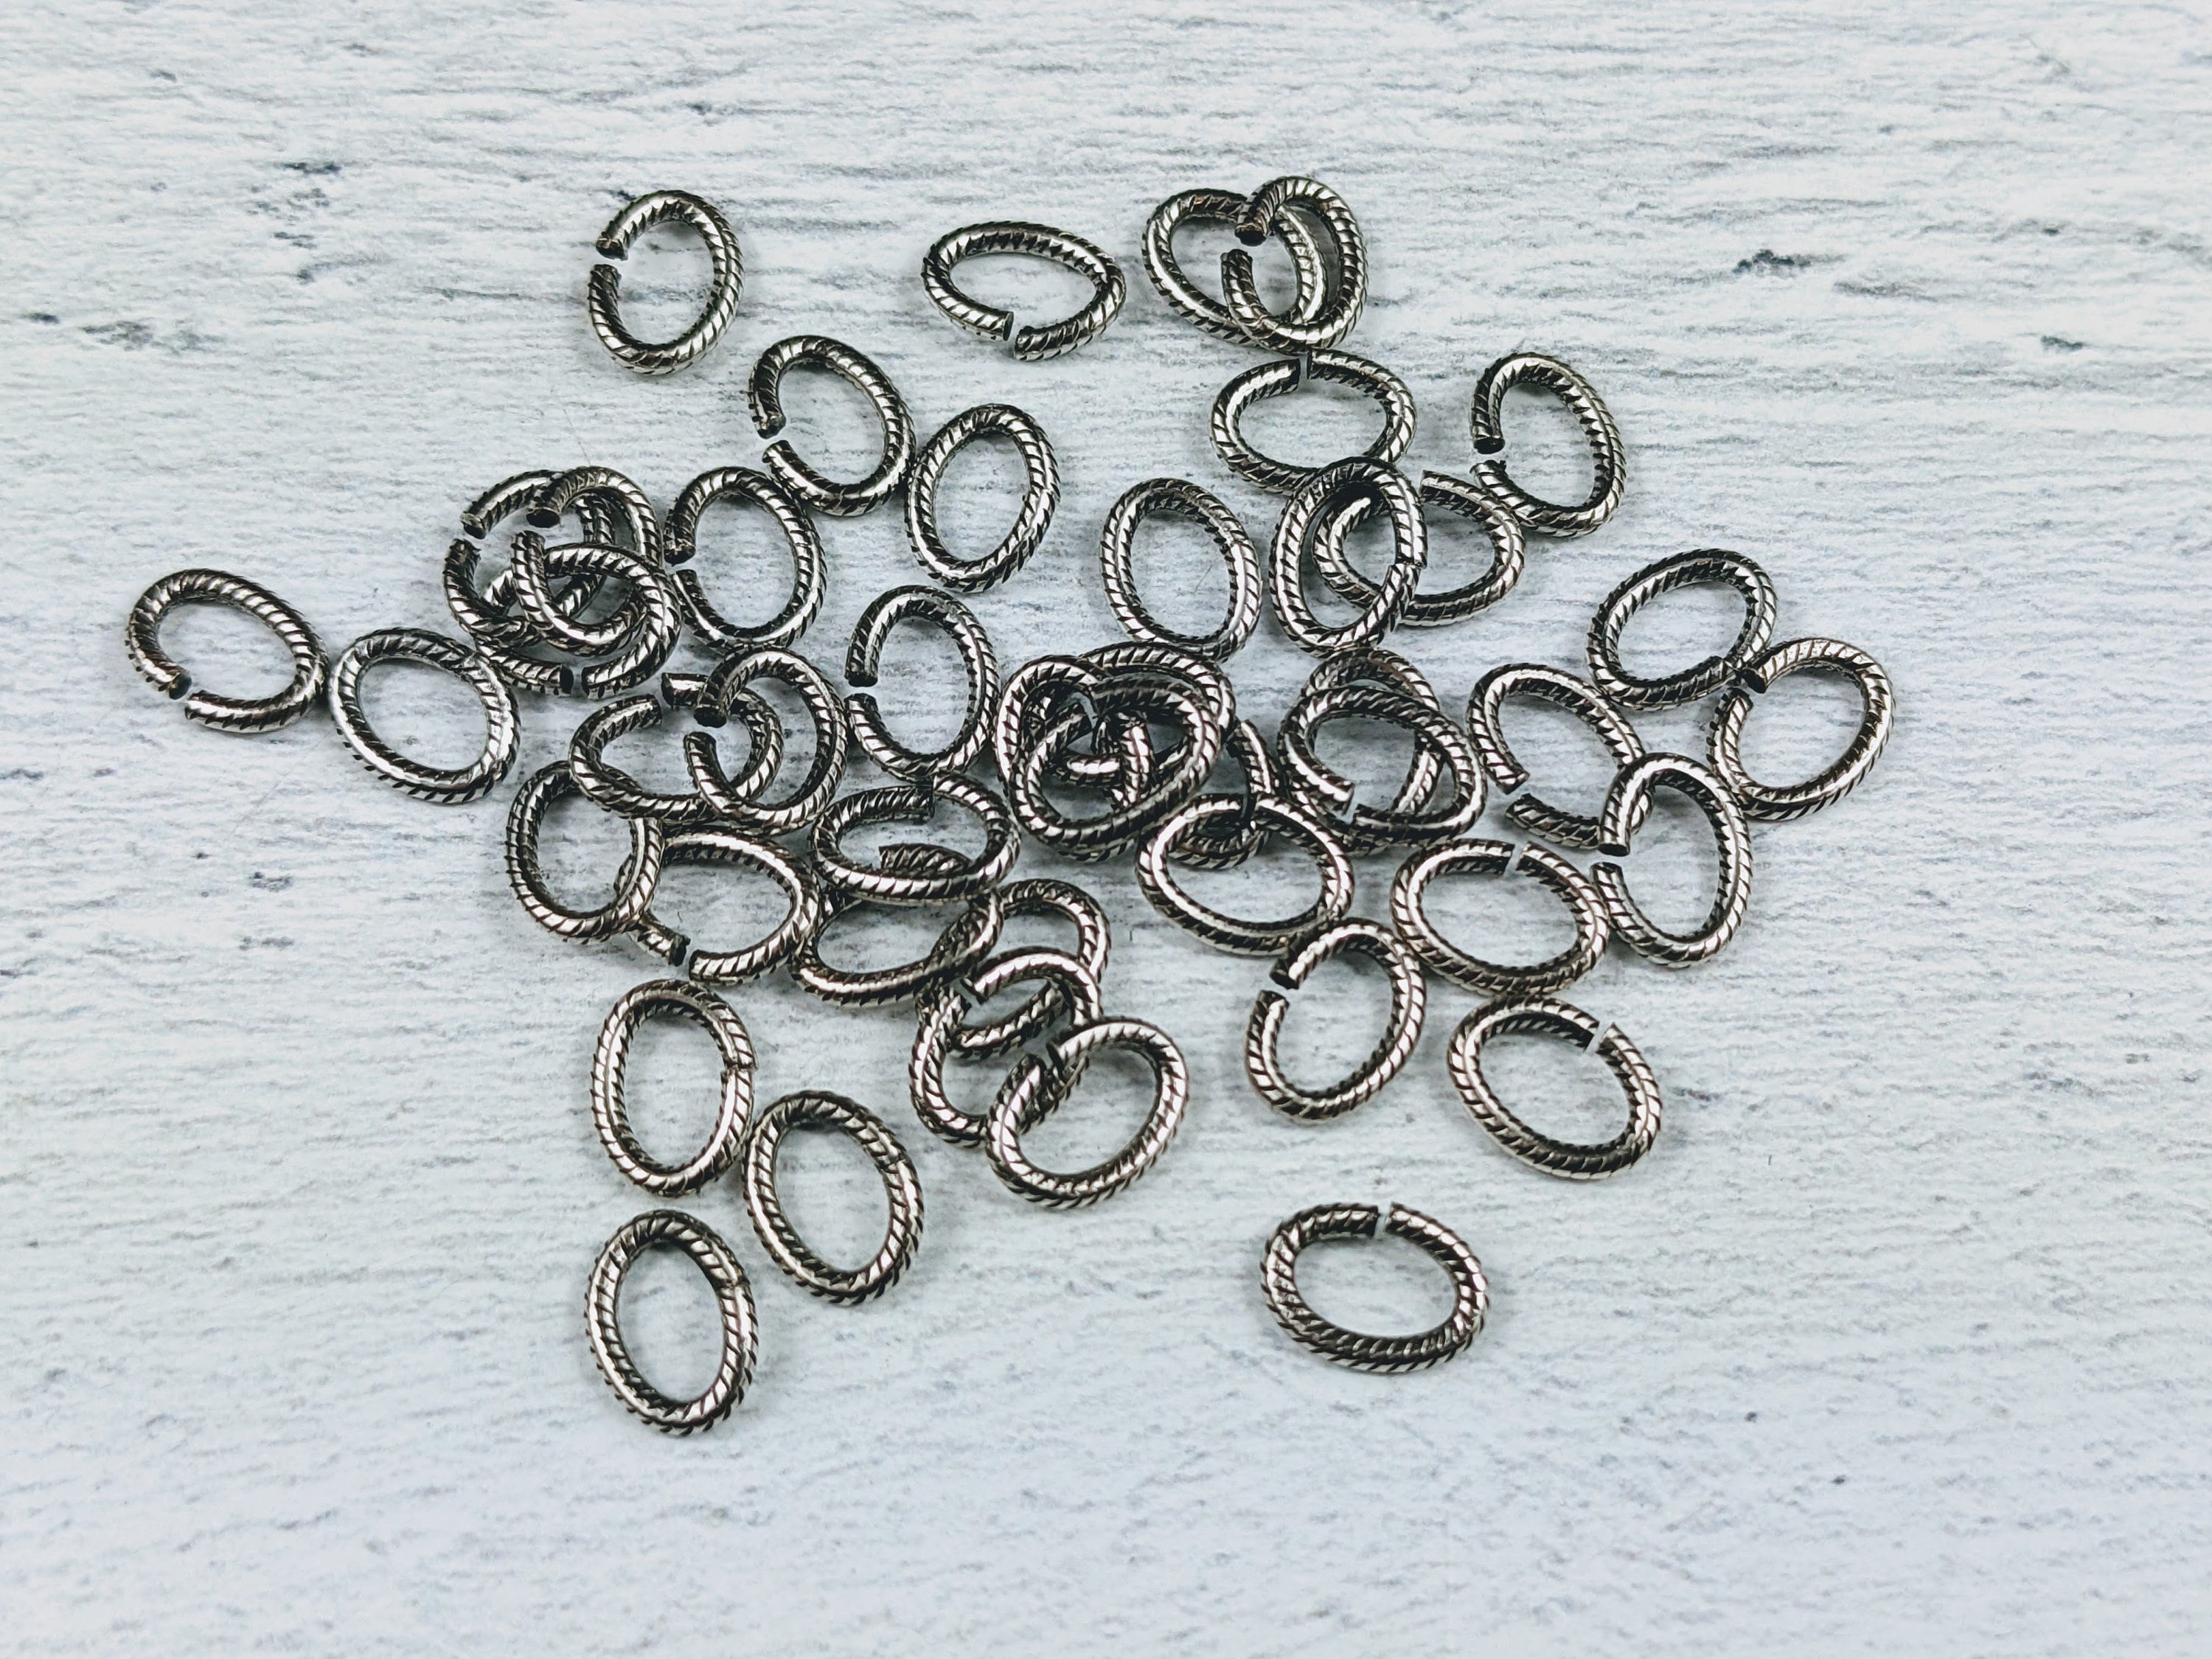 Antique Silver Rope Jump Rings Closed Rings 12 Mm Component DIY